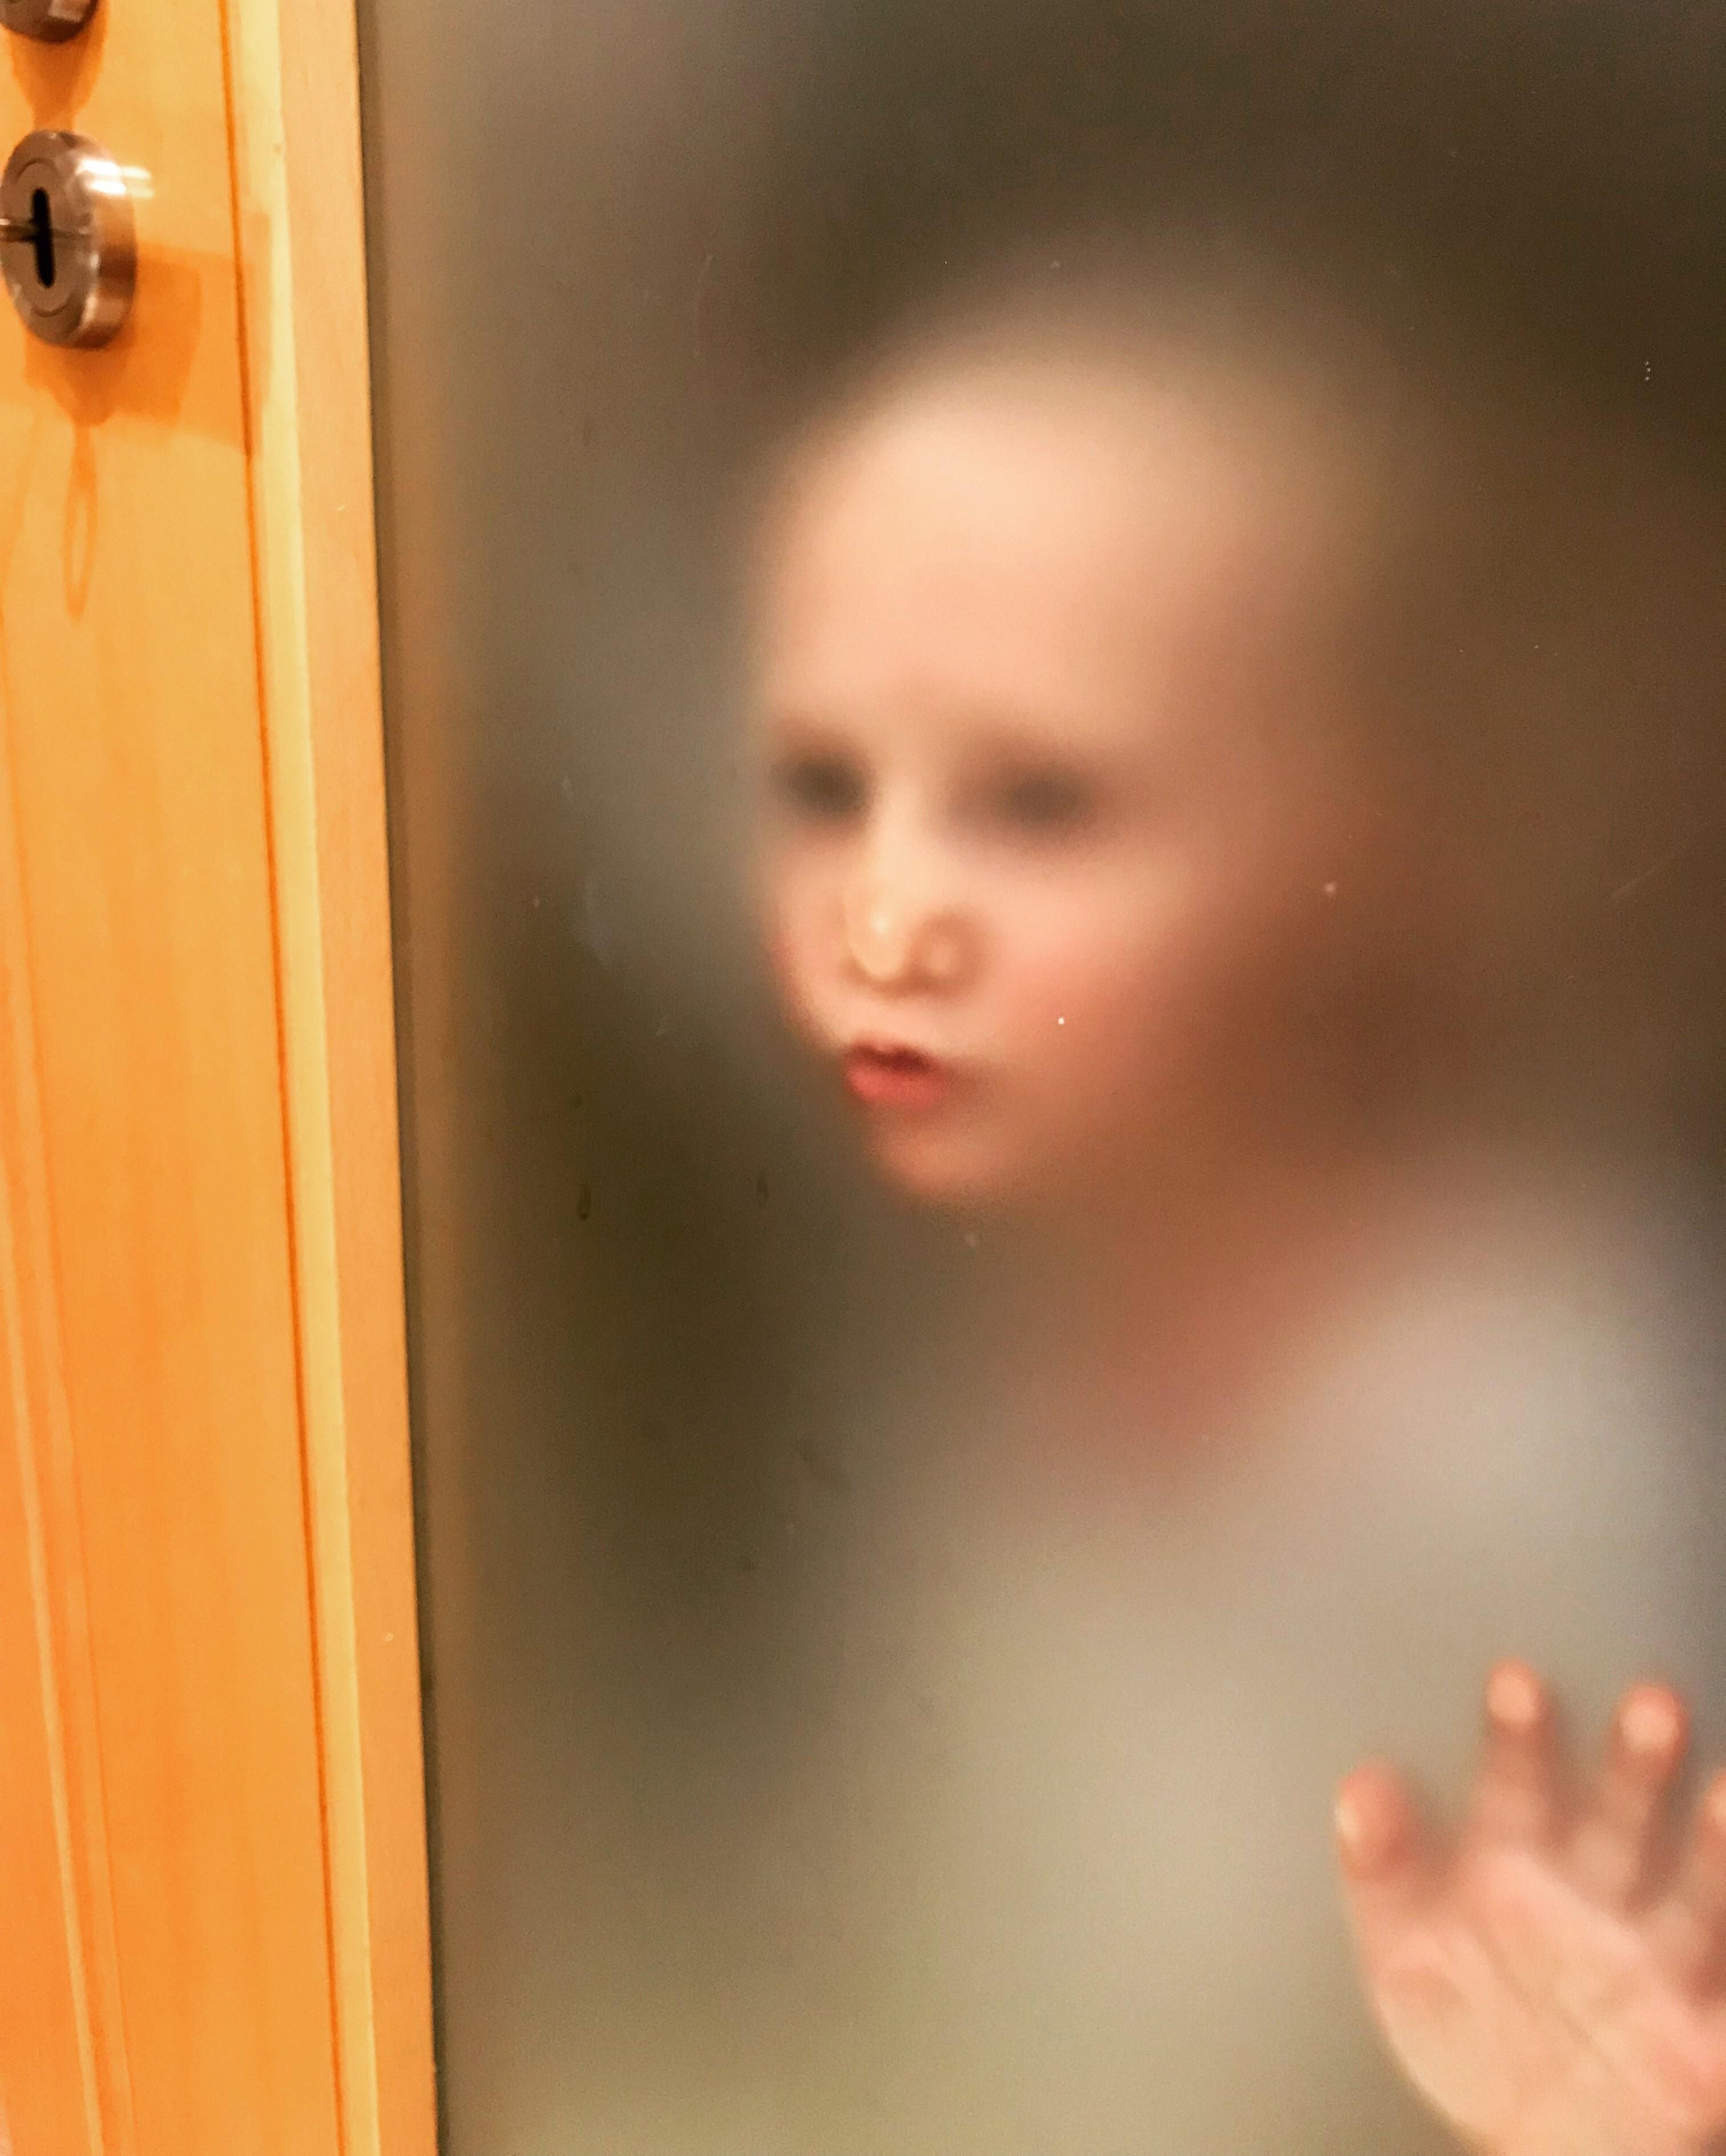 Our AirBnB had a translucent bathroom door. I’m used to my impatient toddler stalking me through the bathroom door, but this took it to a much creepier level.